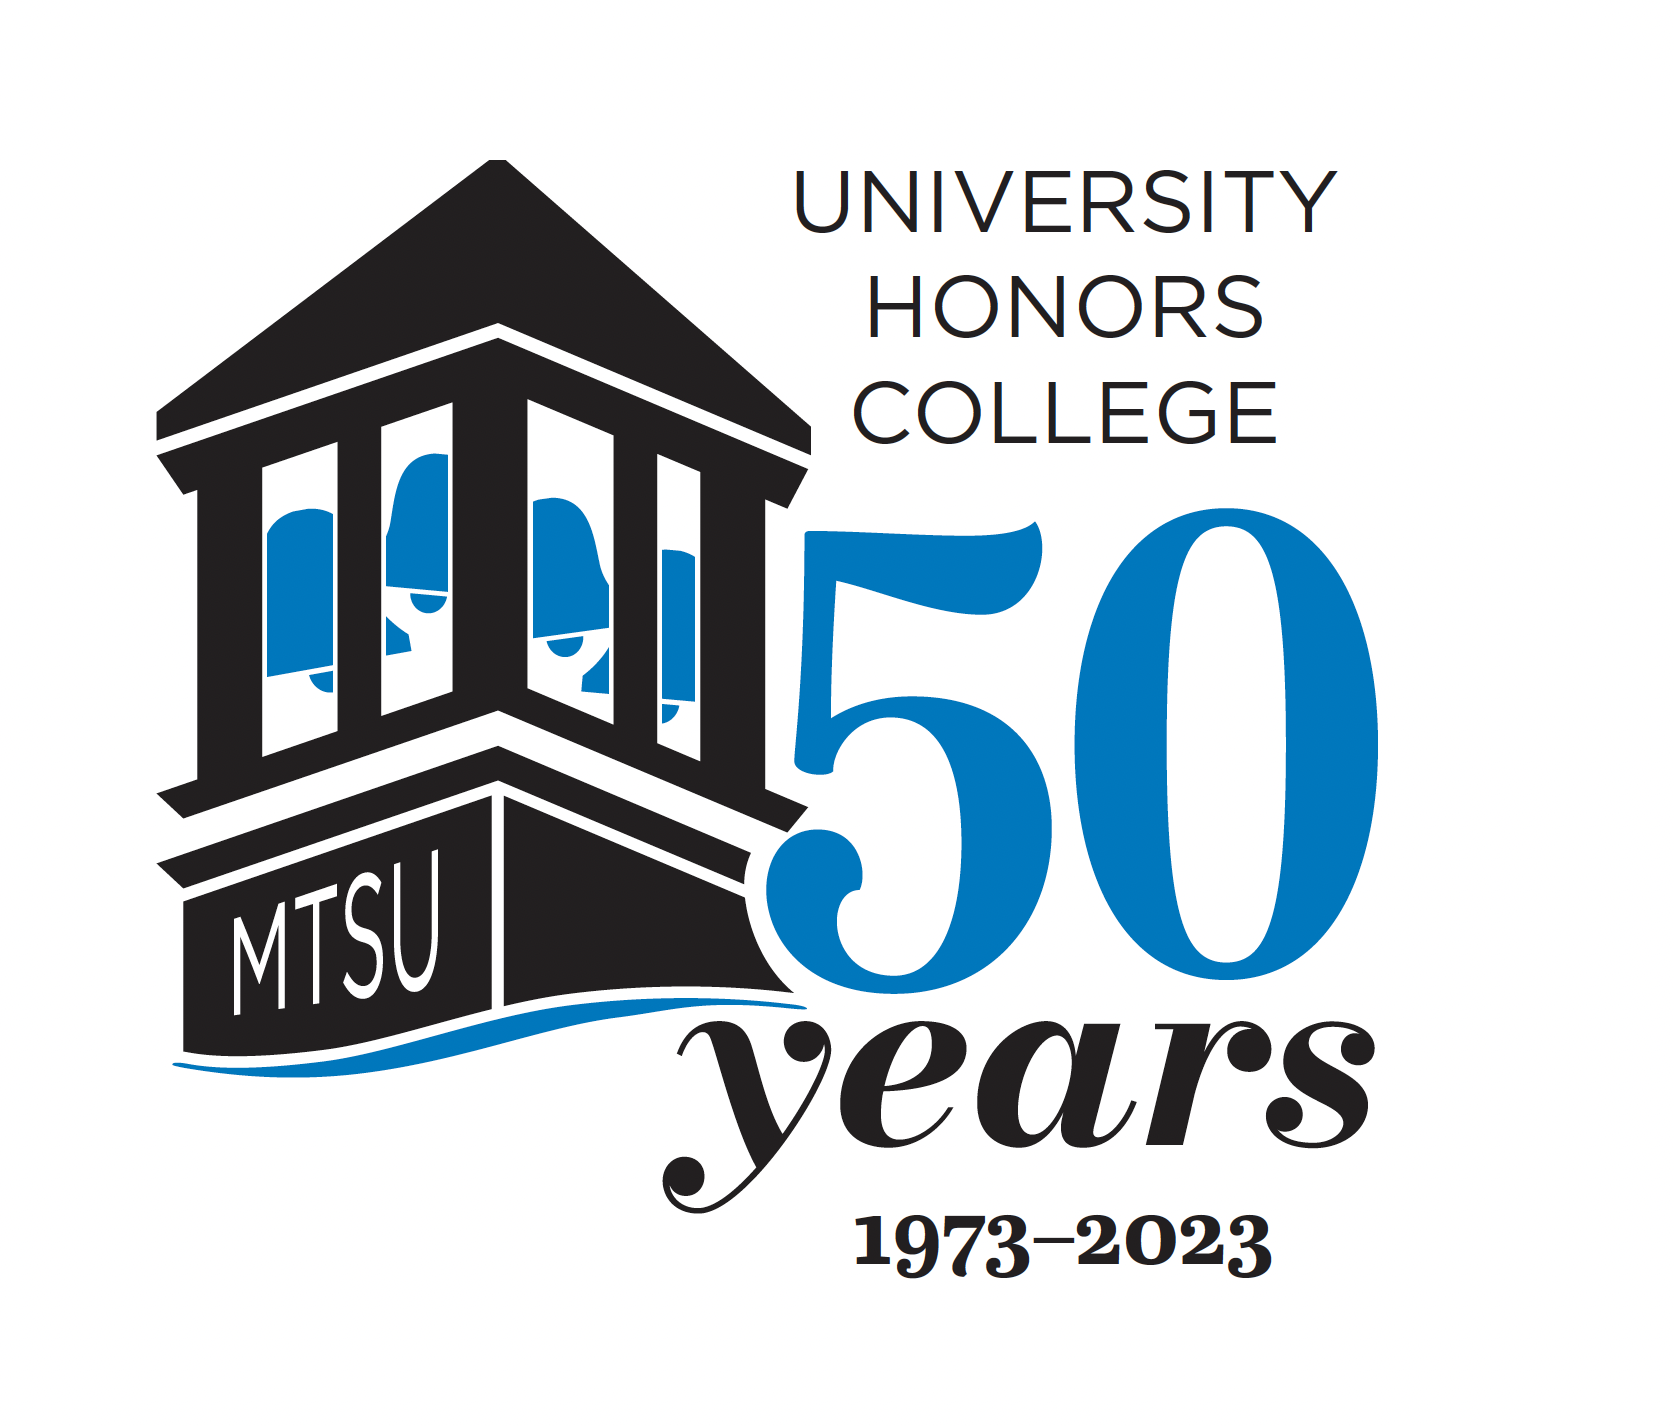 Honors College 50th Anniversary Logo - The initial concept for our 50th anniversary logo was designed by Honors student Rebecca Bartlett, a Media and Entertainment major who will graduate in December 2023.